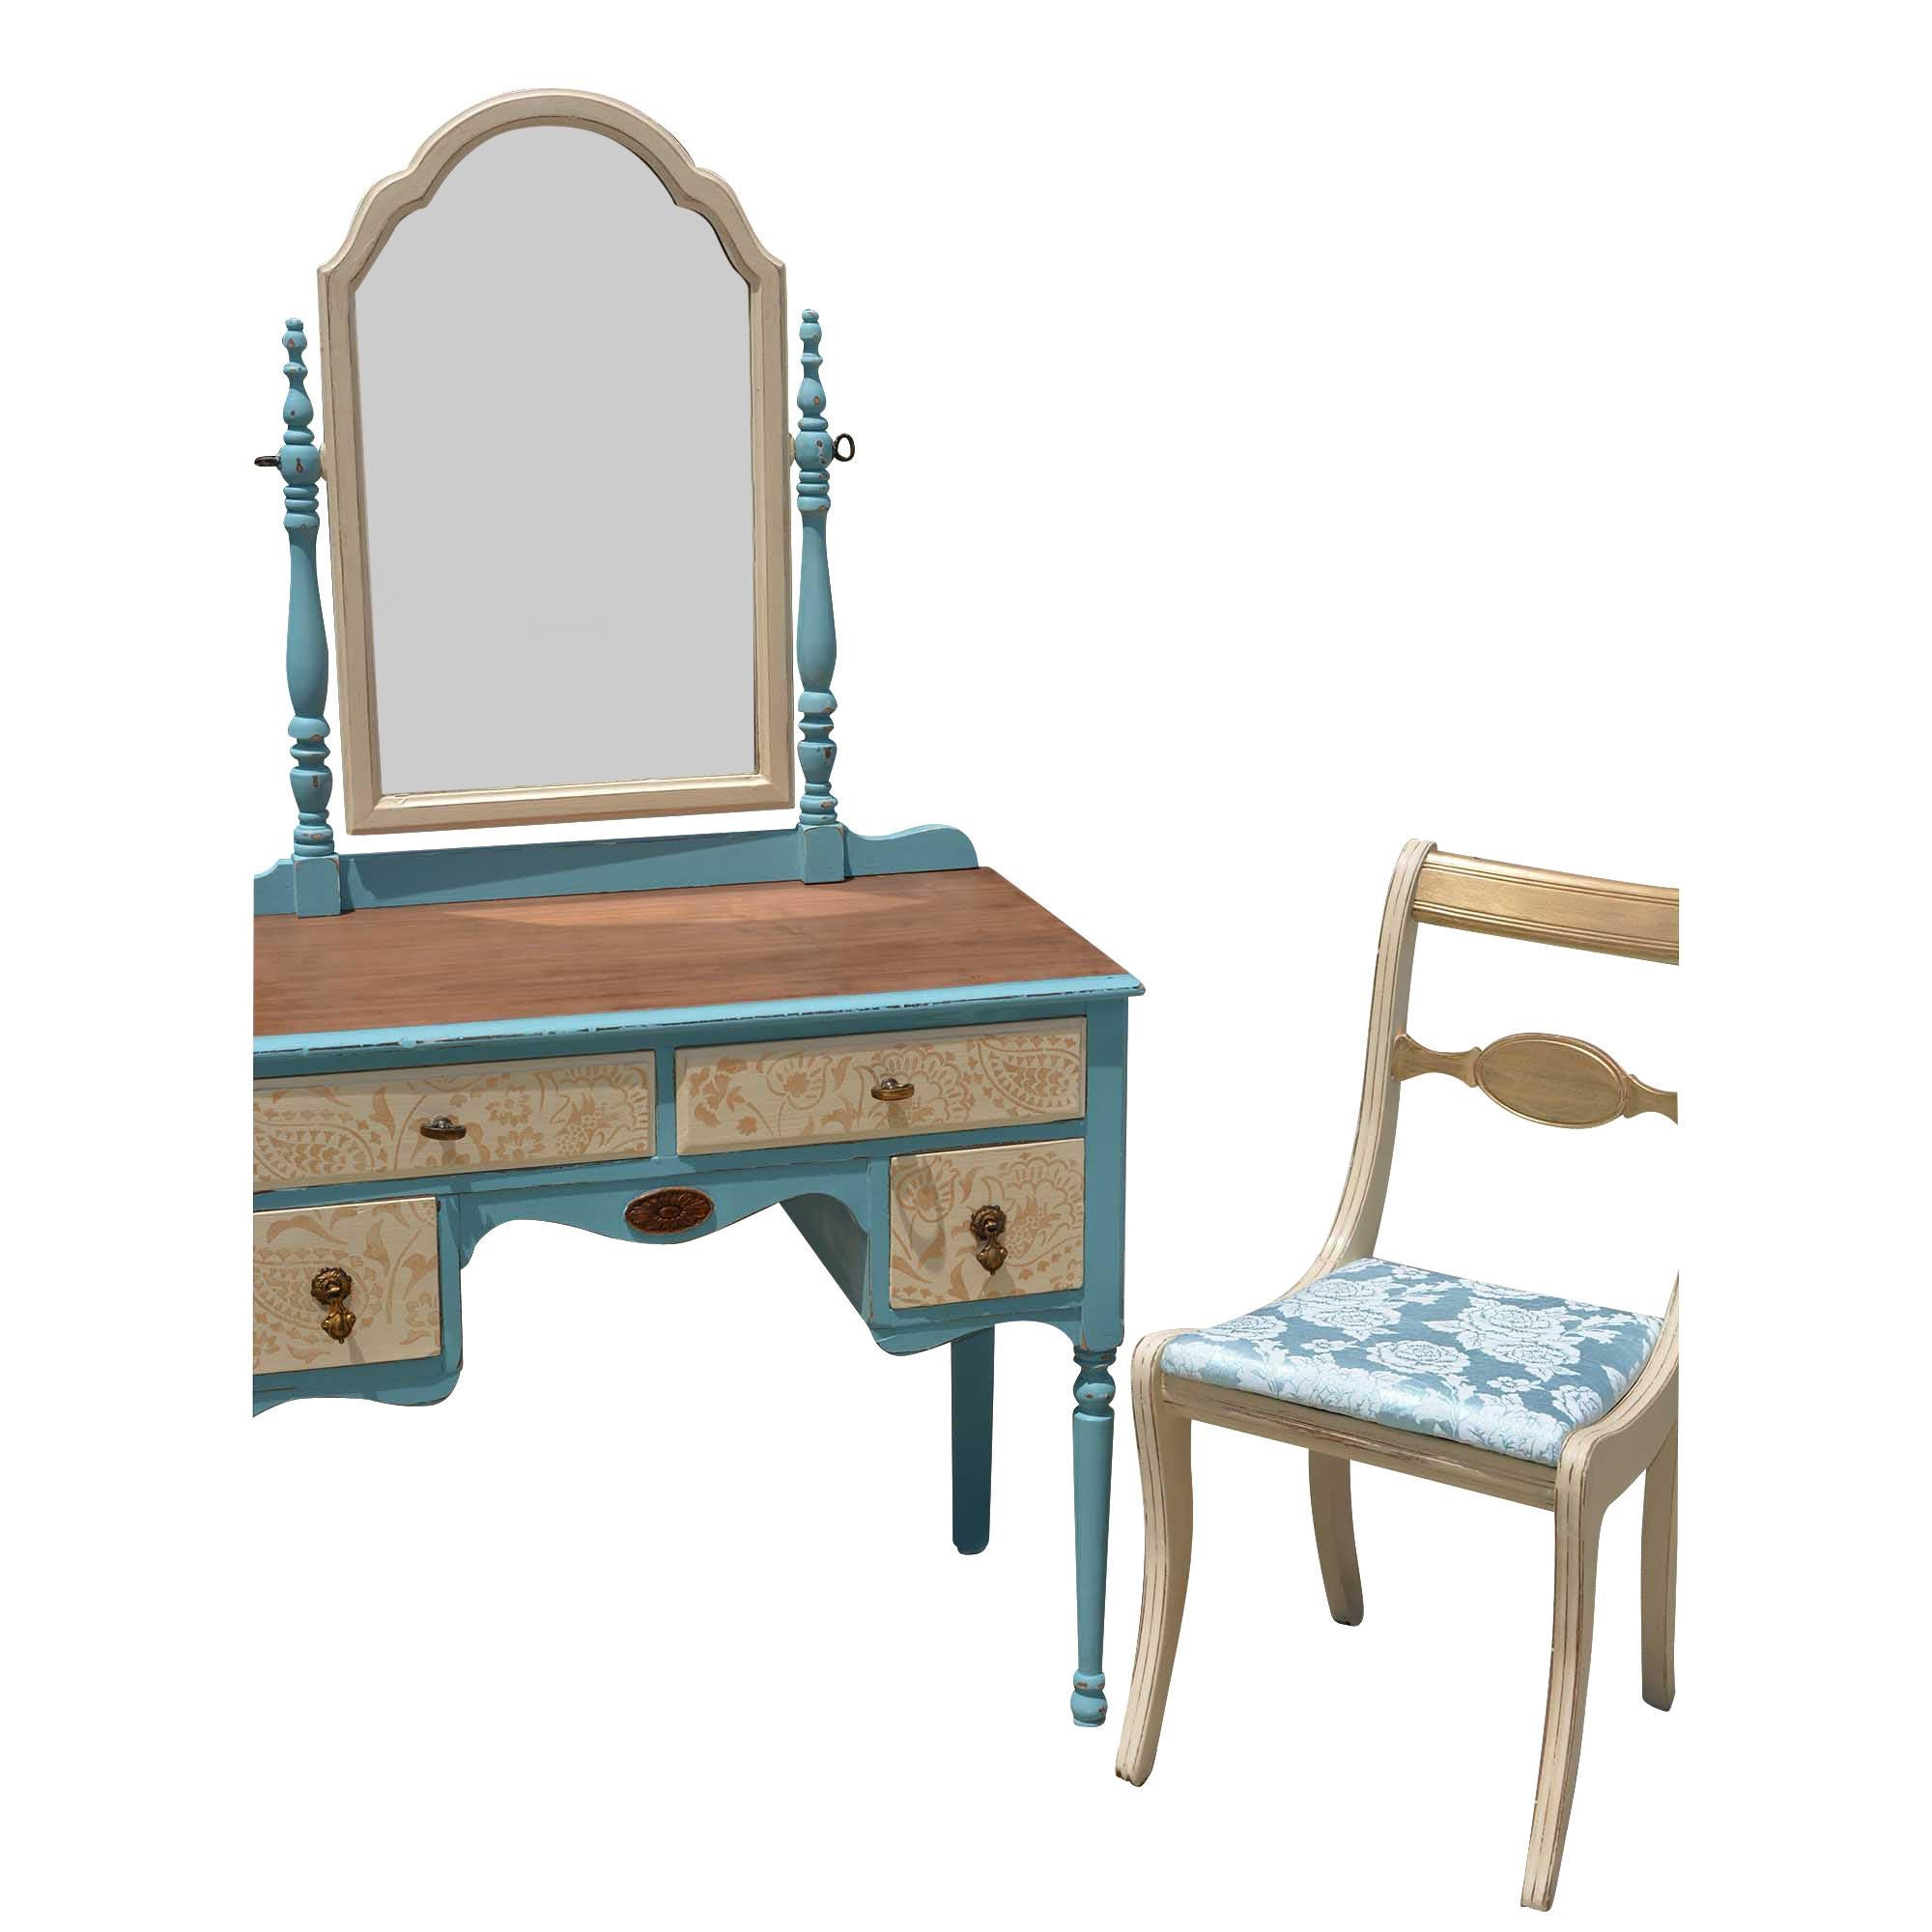 Painted vanity with large mirror has a lovely blue base with light tan and gold accents across the front. Perfect accent to any bathroom or bedroom with lots of storage room in the four drawers and large mirror that is able to tilt. The top of the